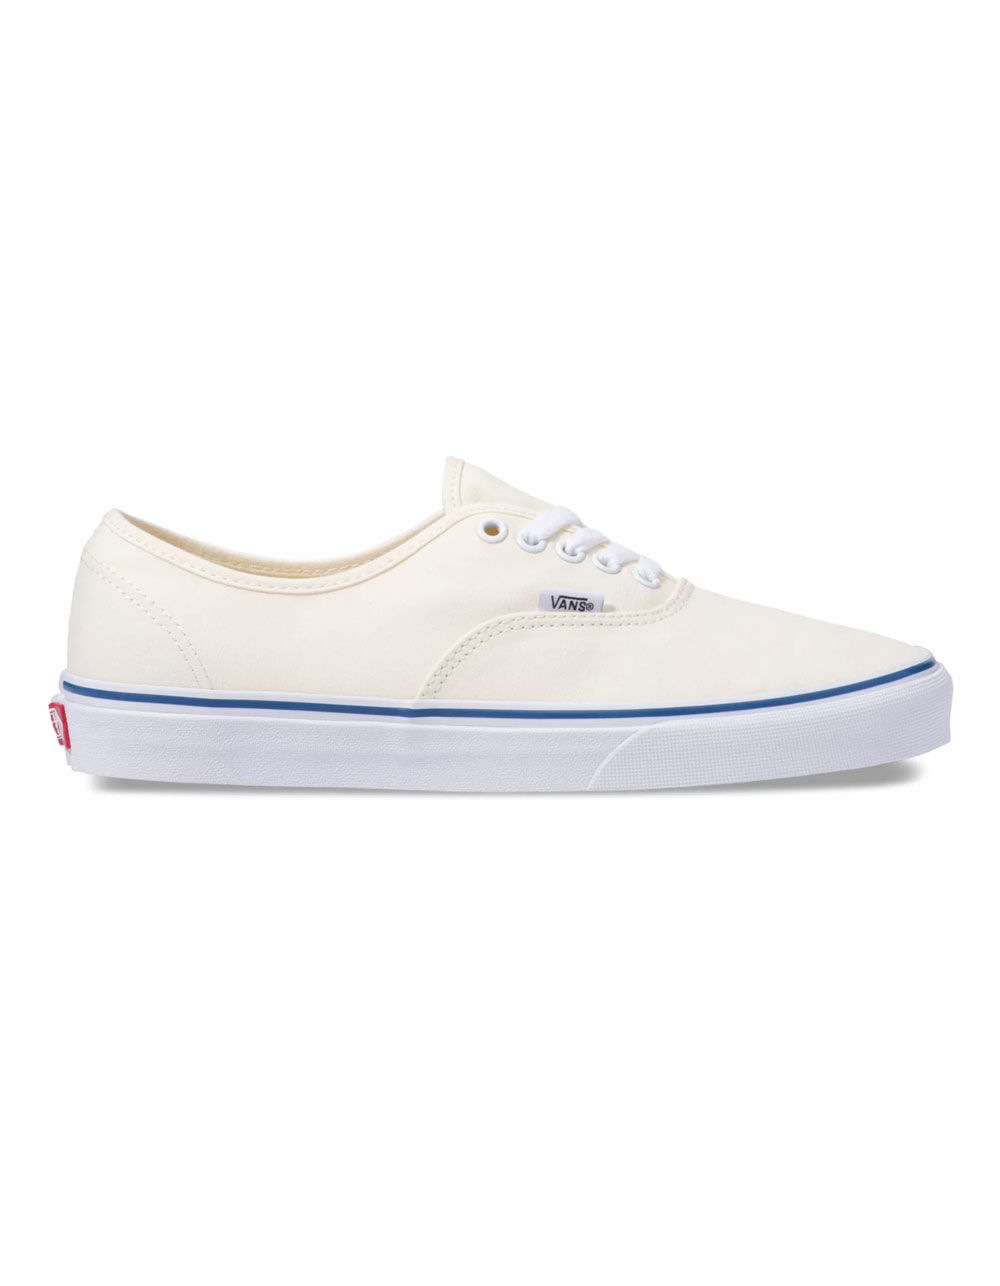 VANS Authentic Off White - OFF WHITE | Tillys